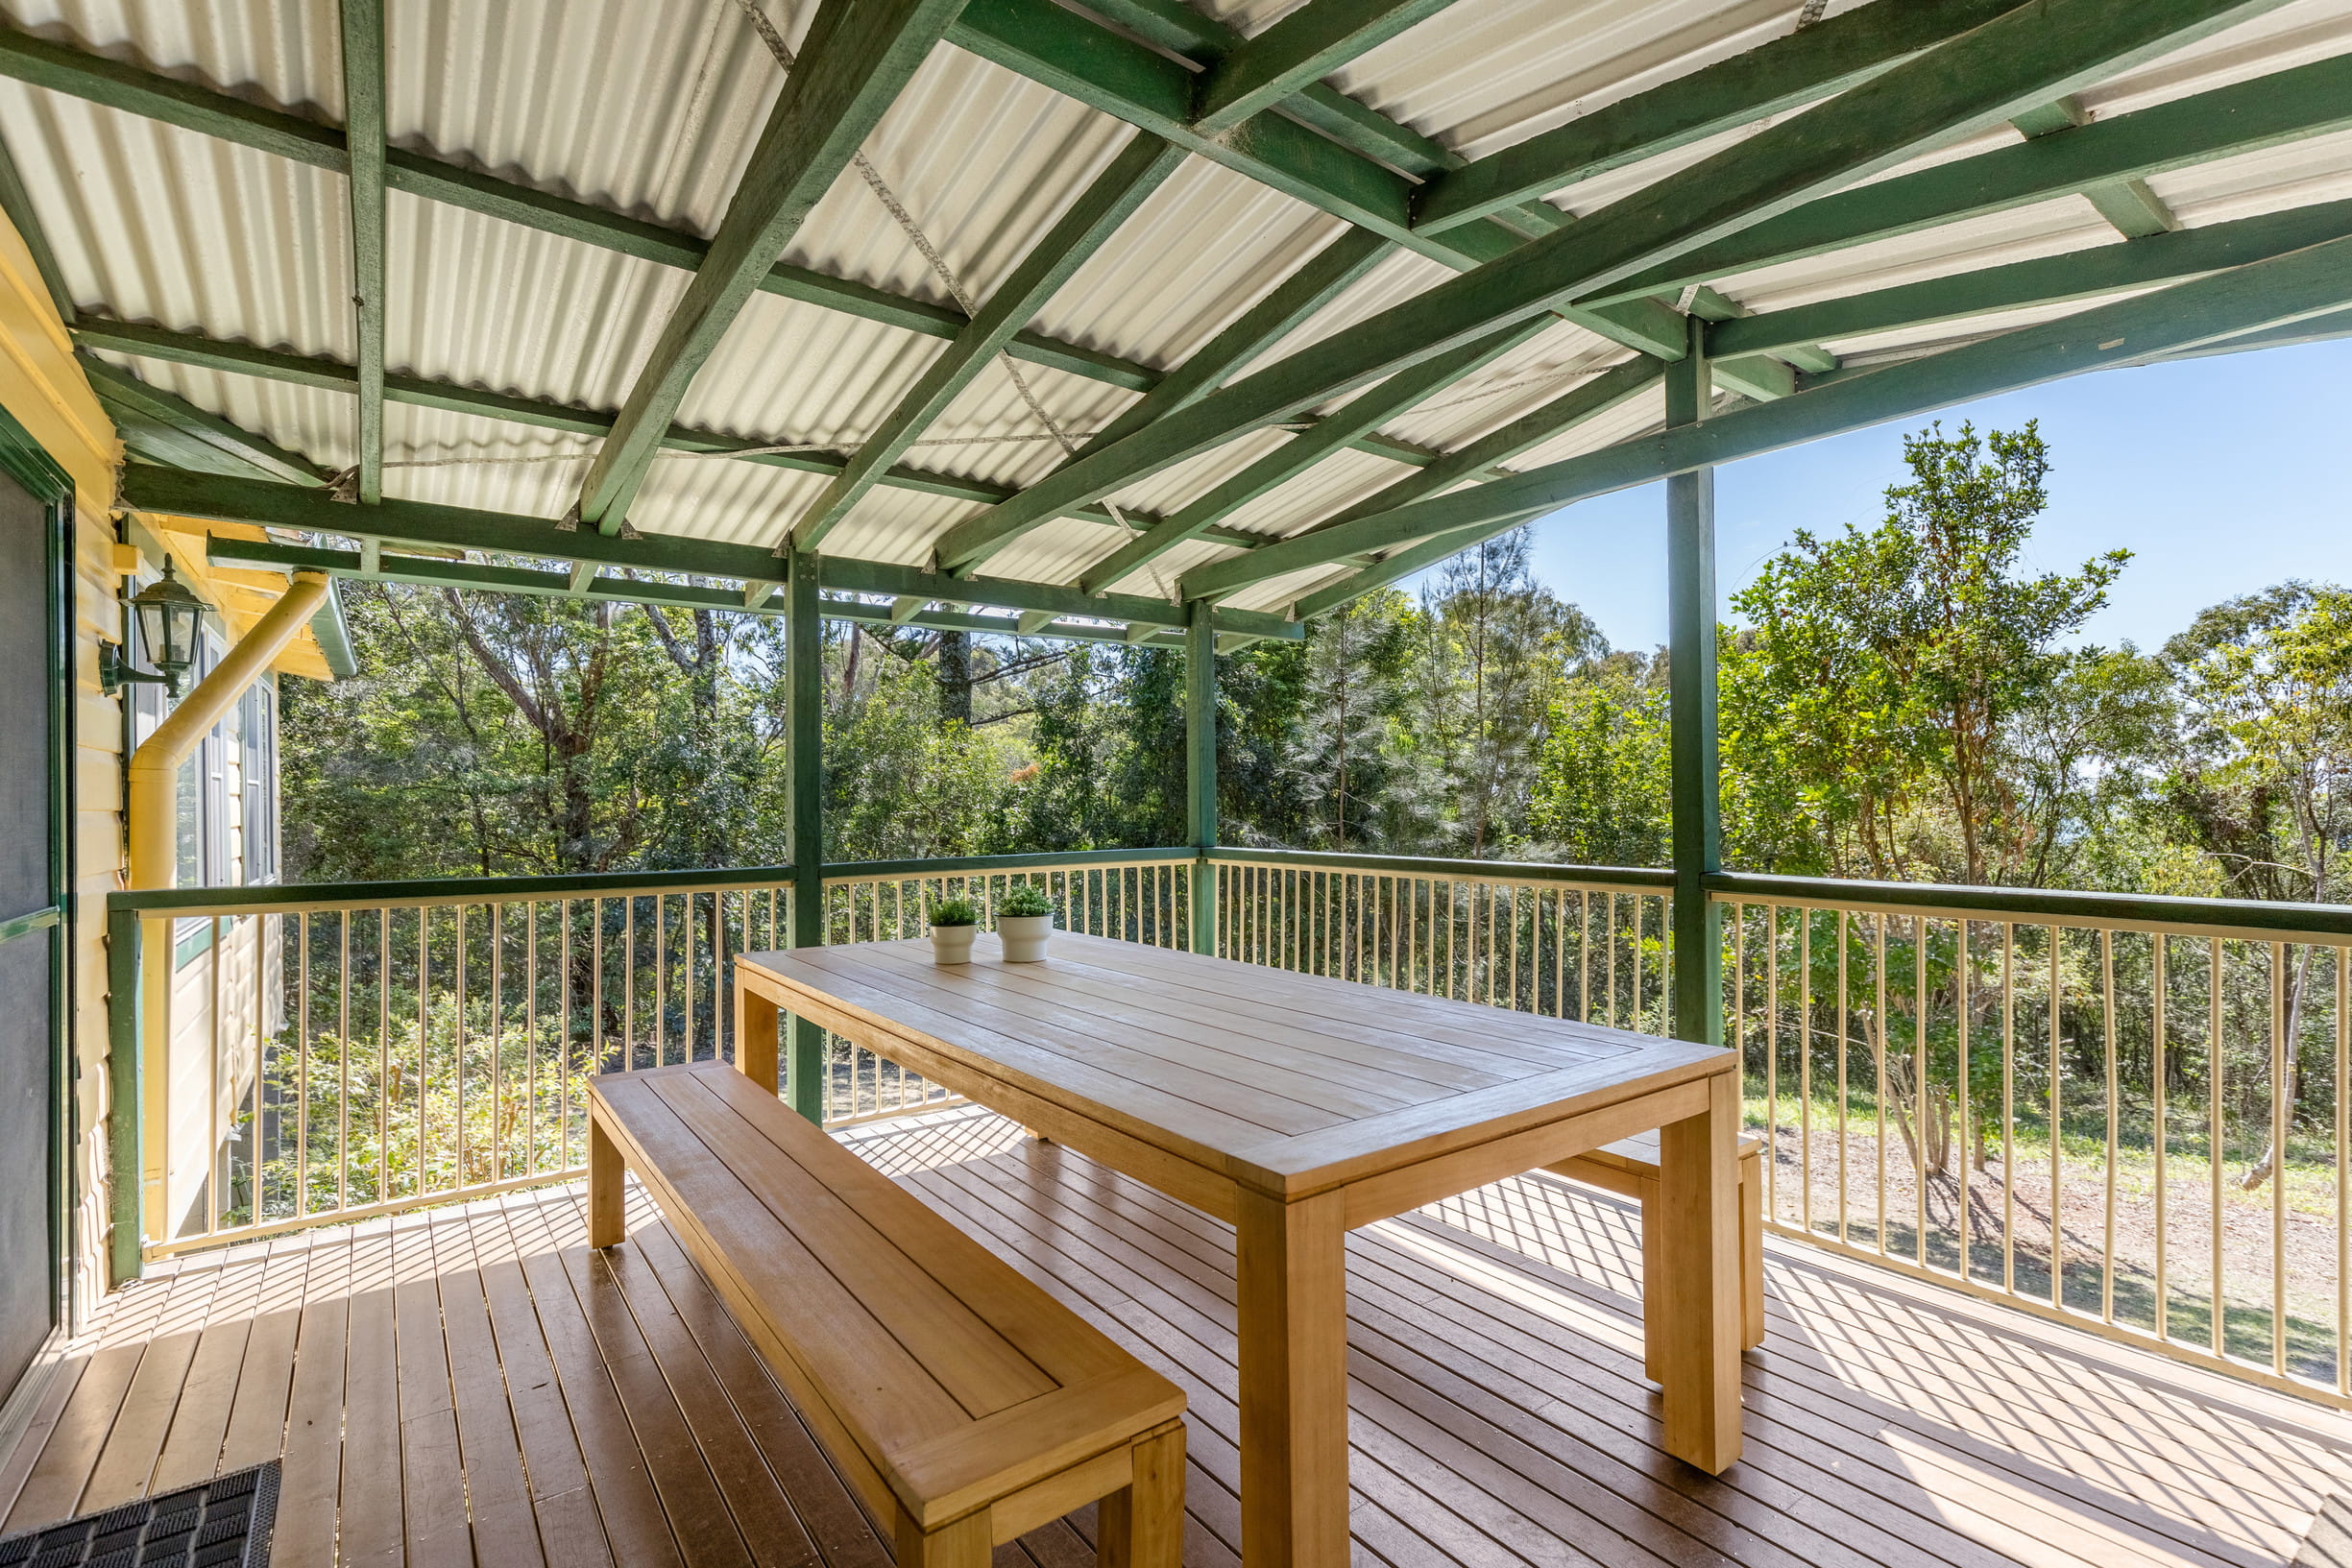 The verandah with outdoor table and benches at Tuckers Rocks Cottage in Bongil Bongil National Park. Photo: Mitchell Franzi/DPIE